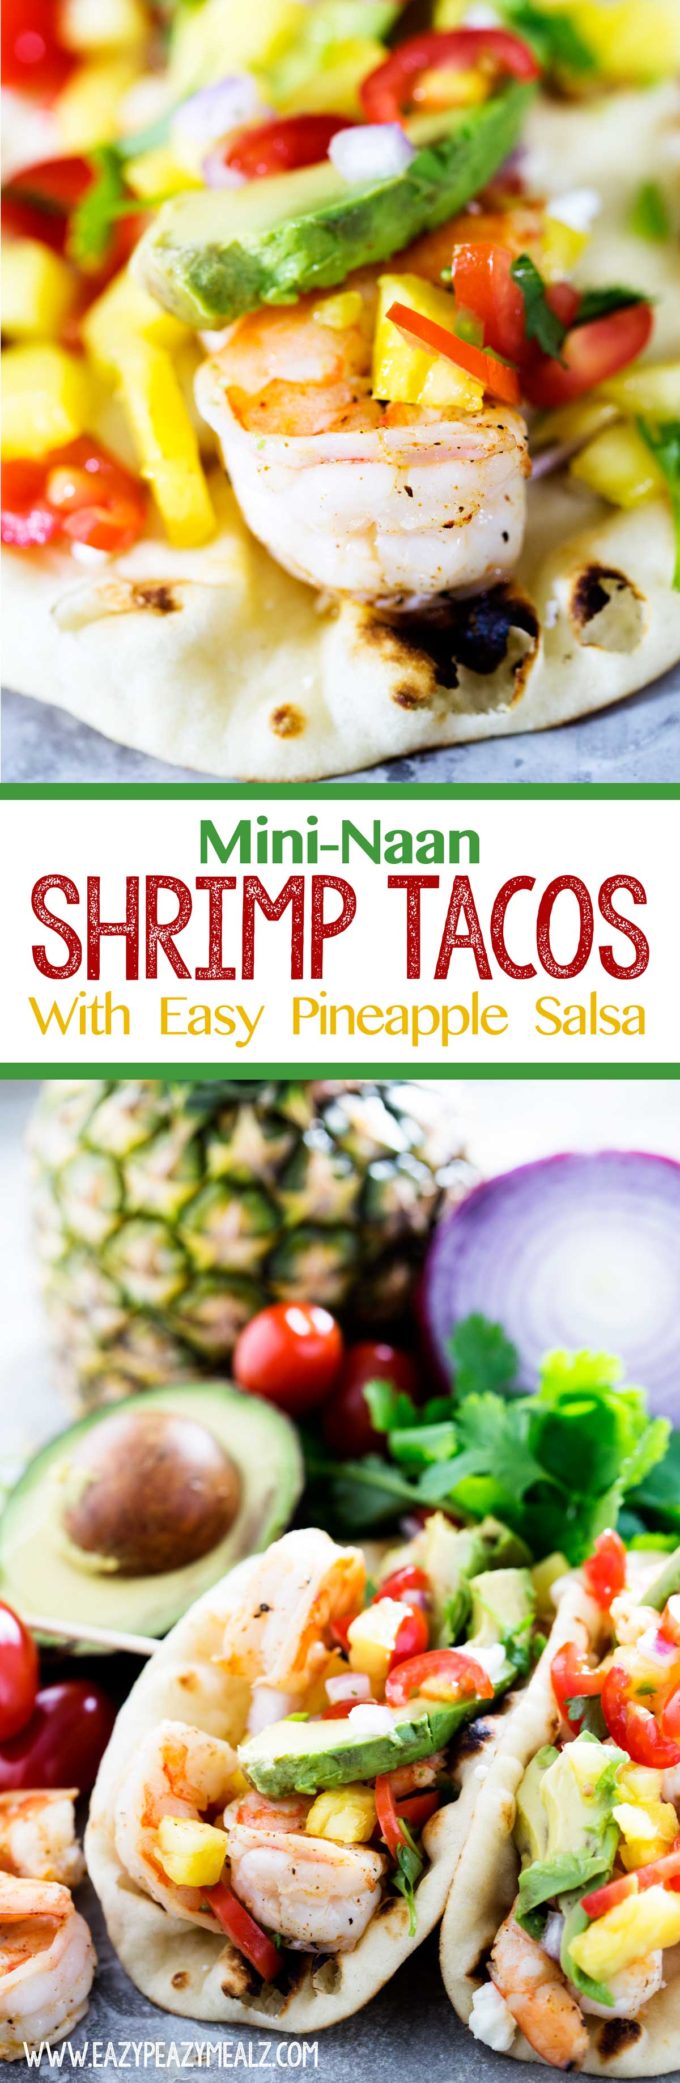 Delicious and easy shrimp tacos with pineapple salsa in a mini naan taco shell. 